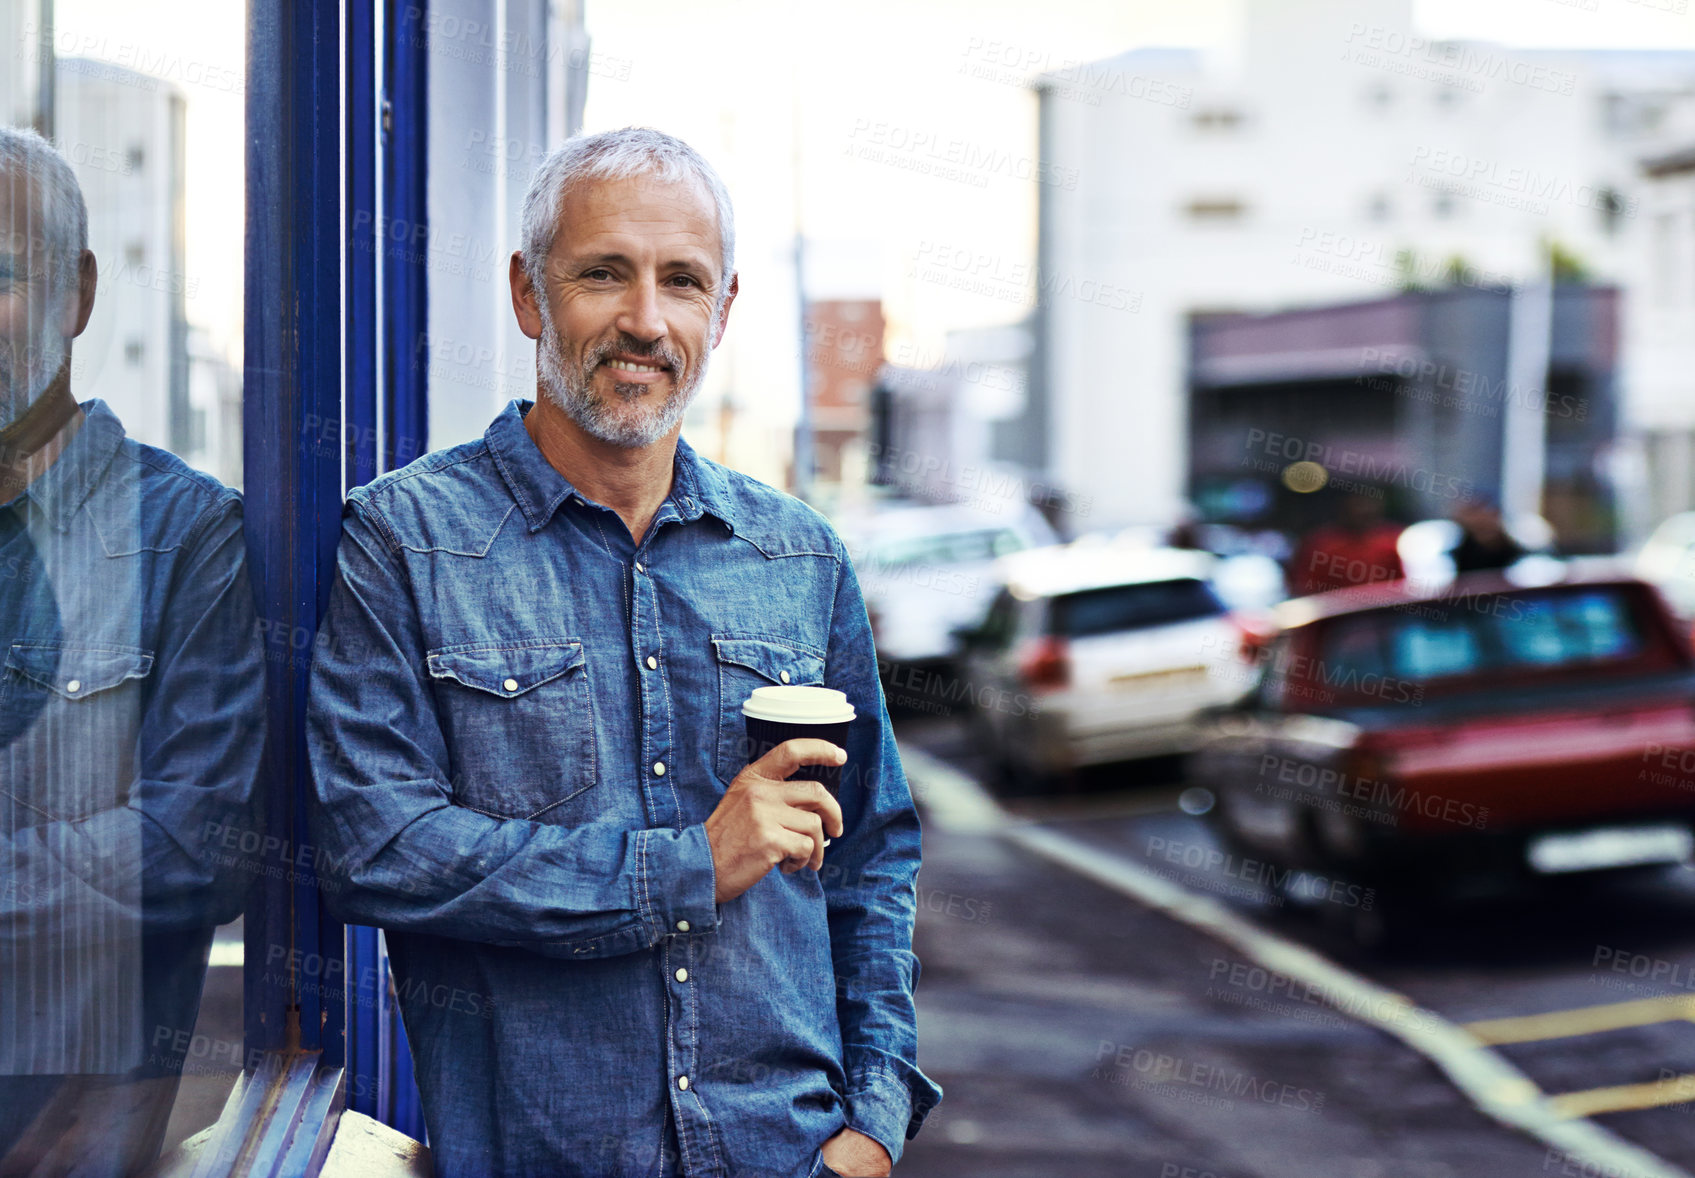 Buy stock photo Portrait of a handsome mature man drinking takeaway coffee while out in the city